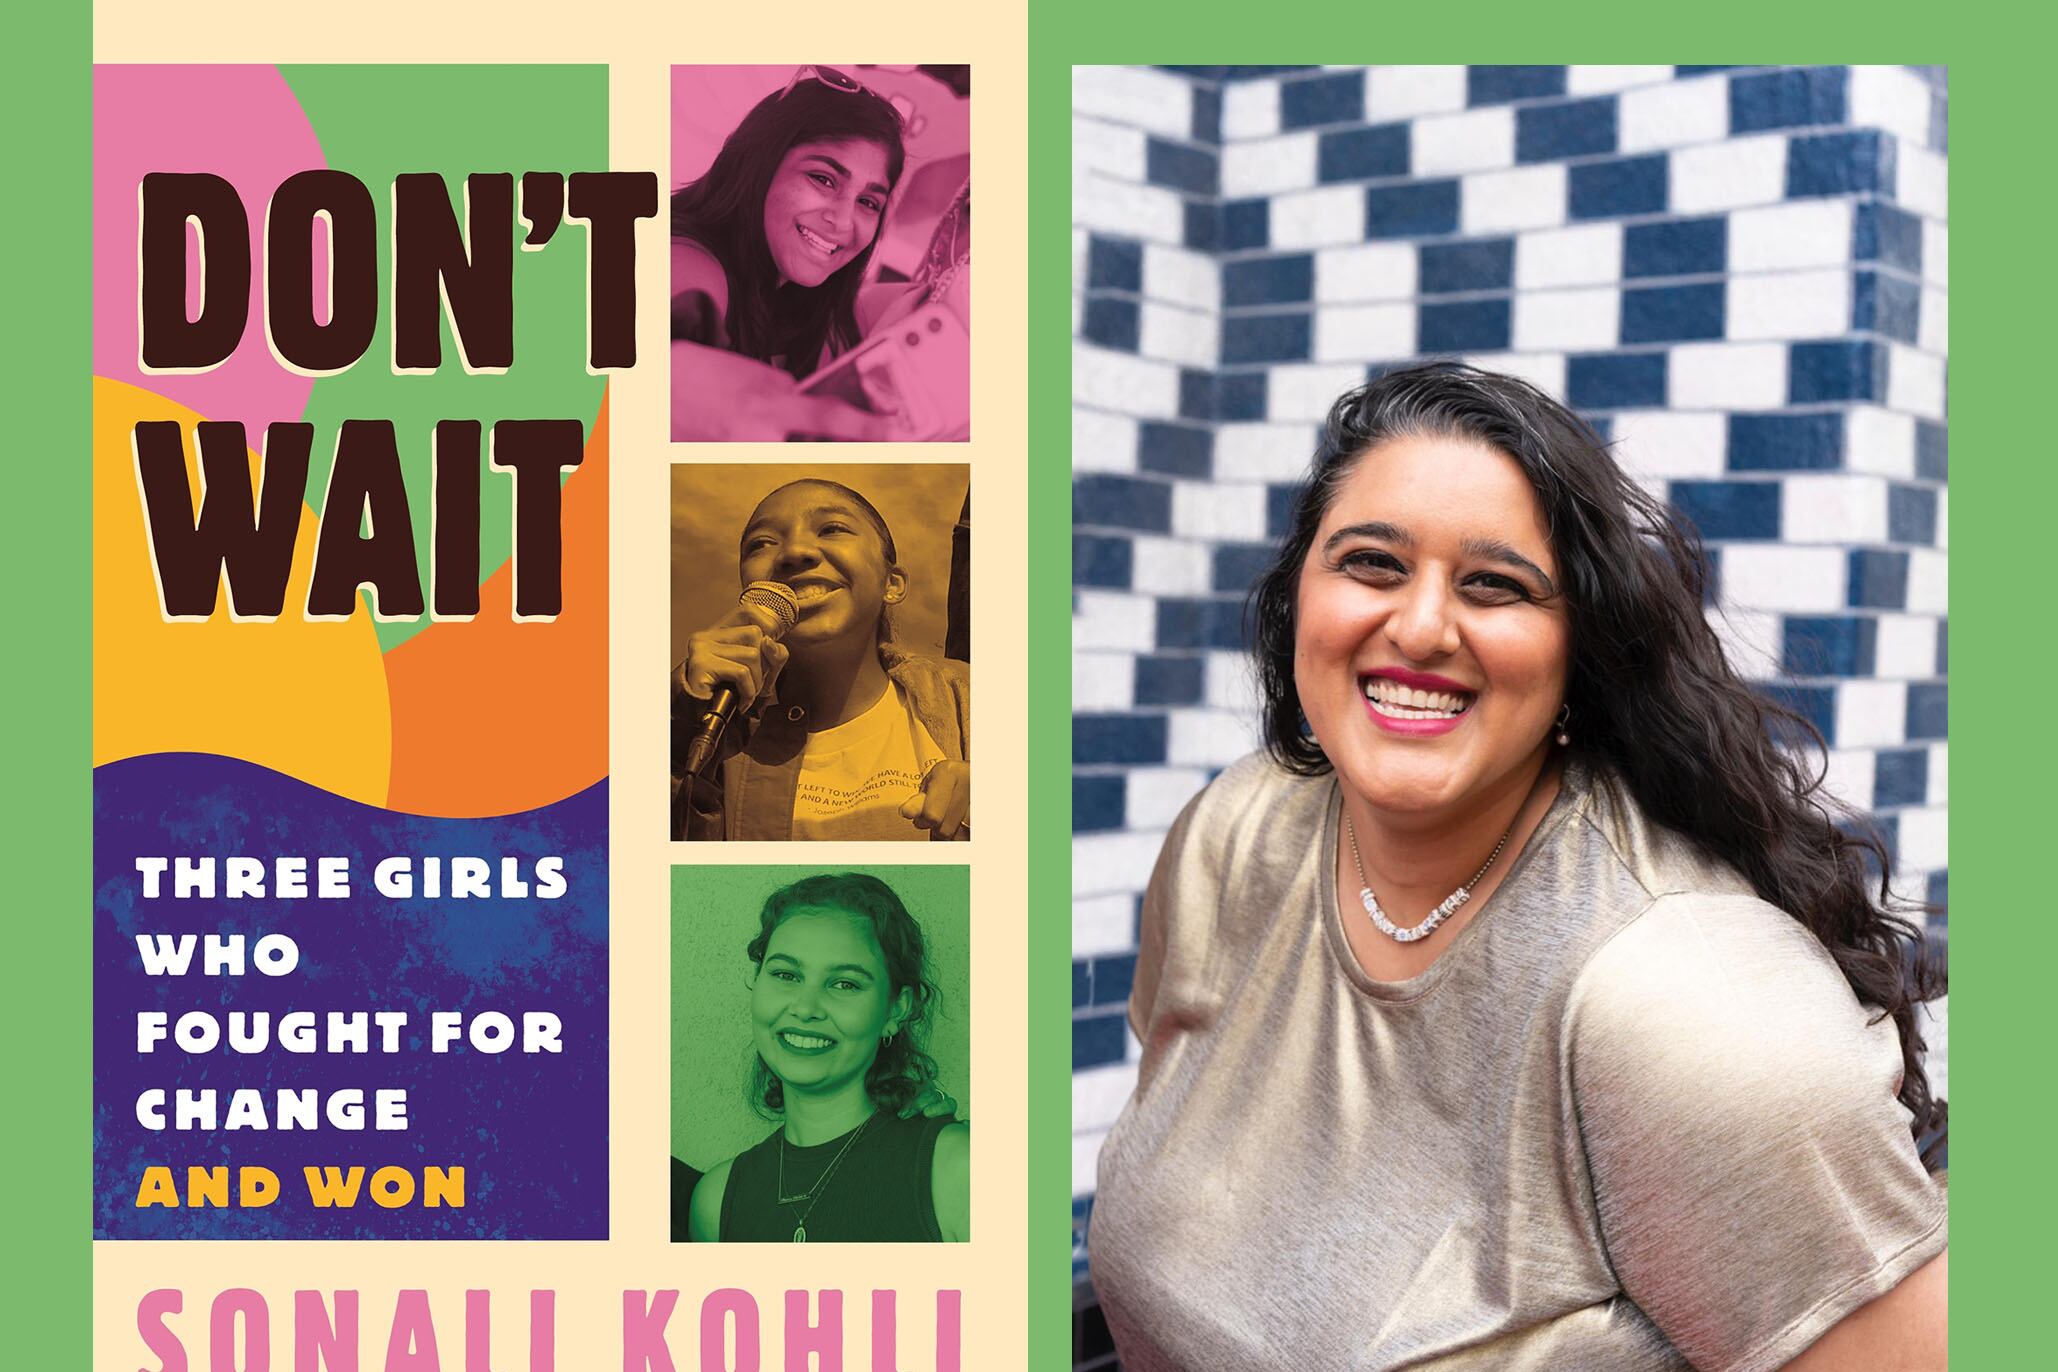 Two images on a green background. The image on the left is a book cover that shows three photos of three young girls with text of the book title and author name. The photo on the right is a portrait of the author of the book, Sonali Kohli, she has long dark hair and wearing a grey shirt.